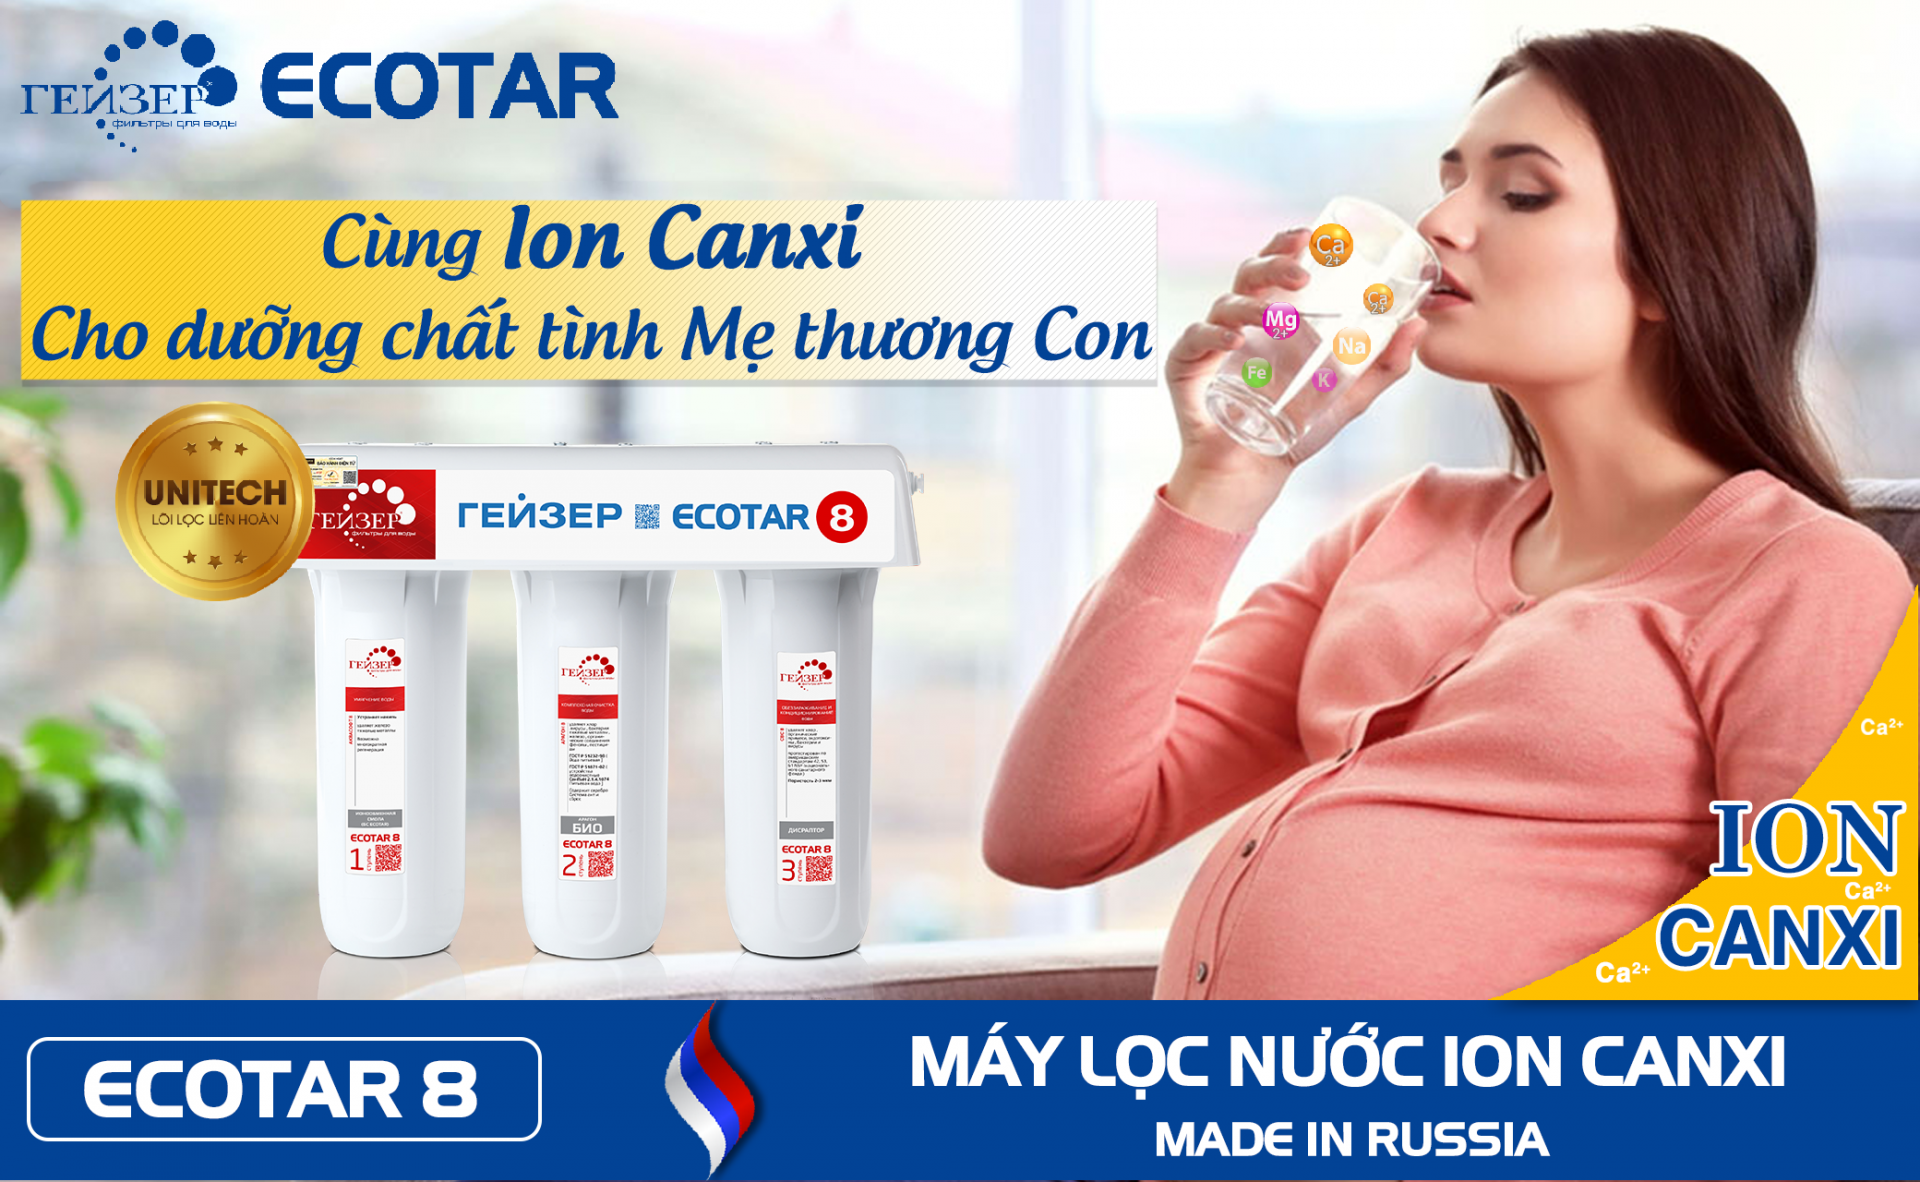 Nuoc Ion Canxi 1